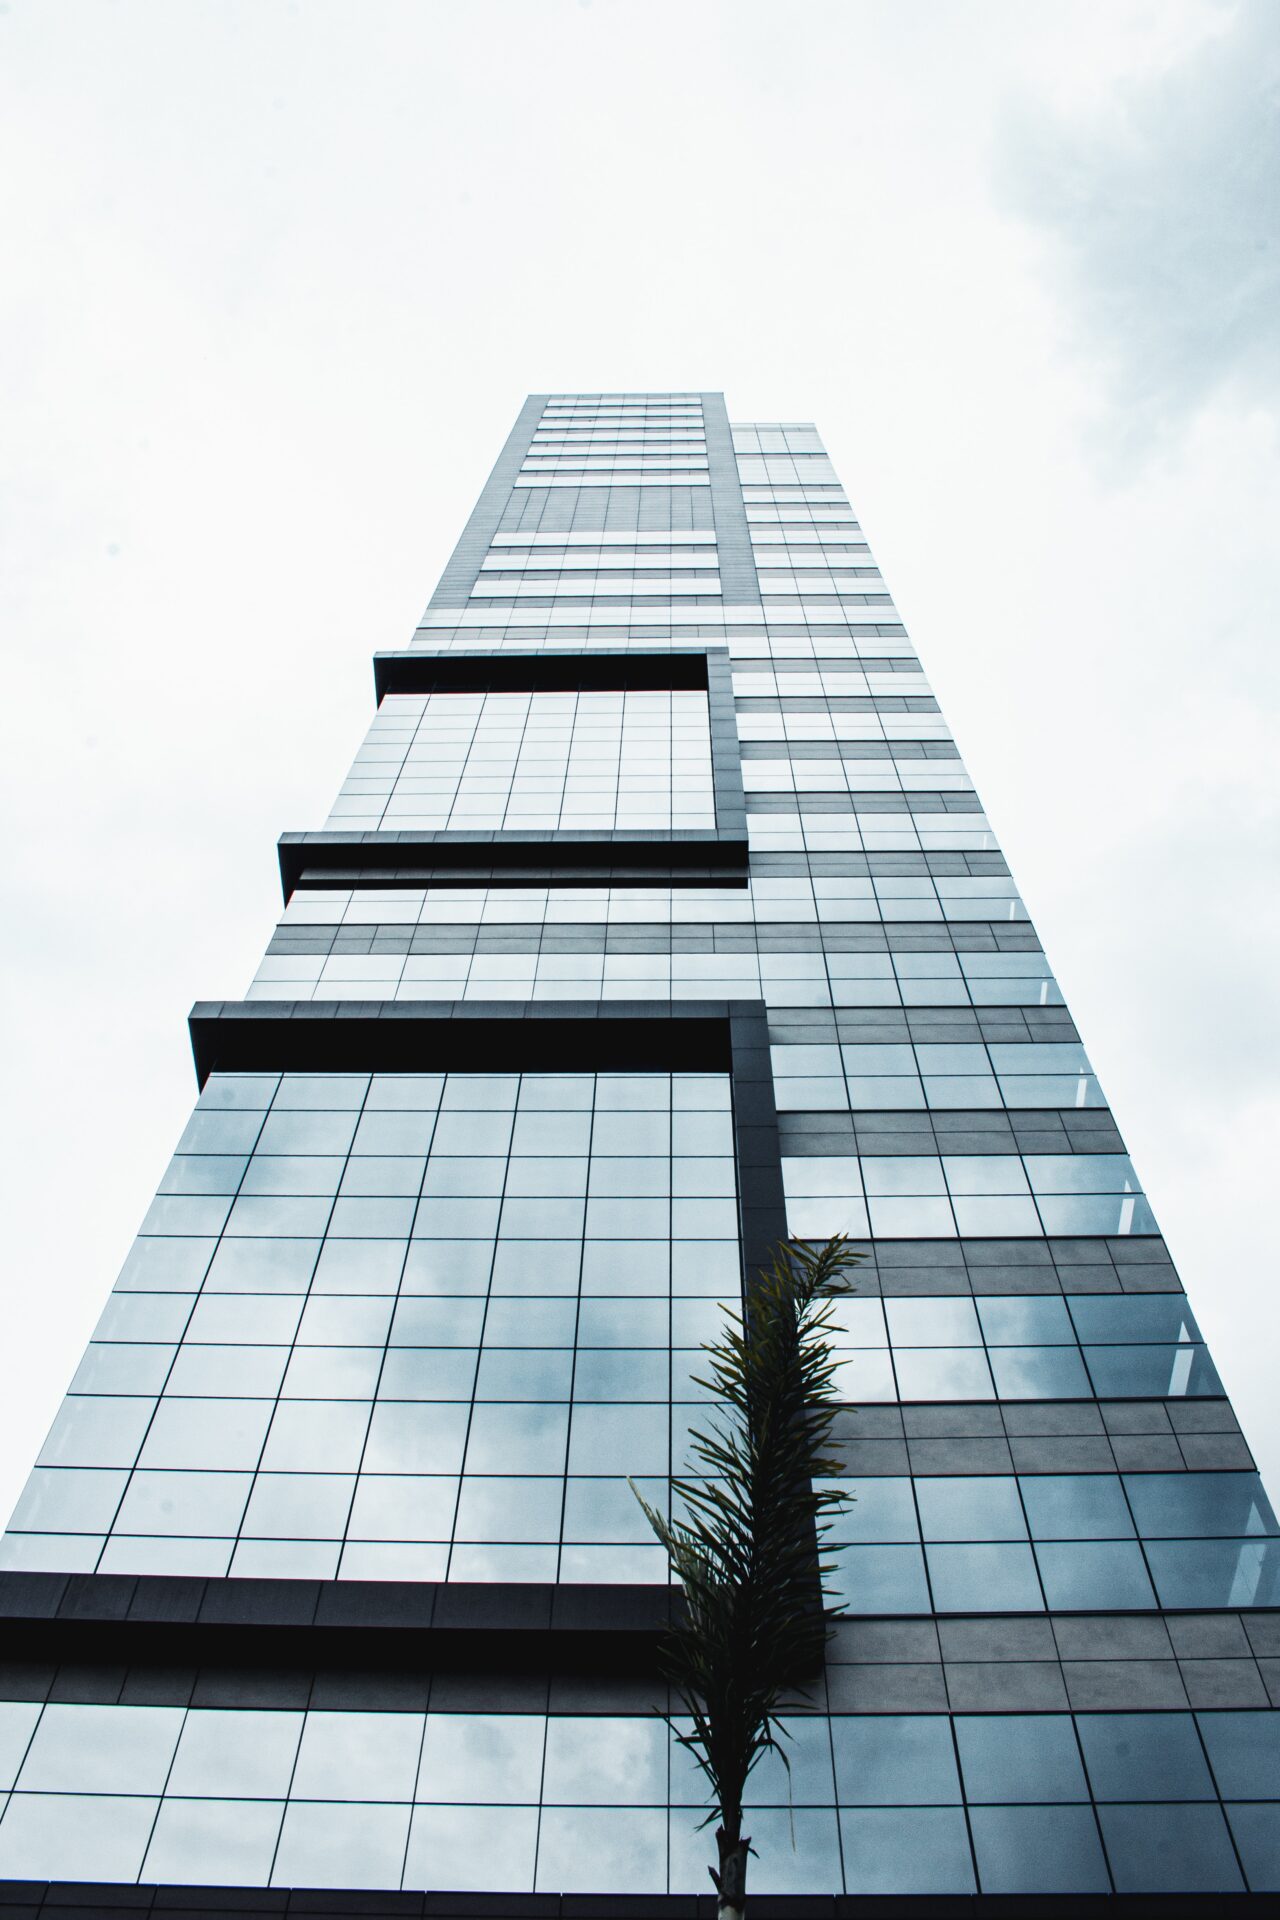 A tall building with many windows and a tree in the bottom.